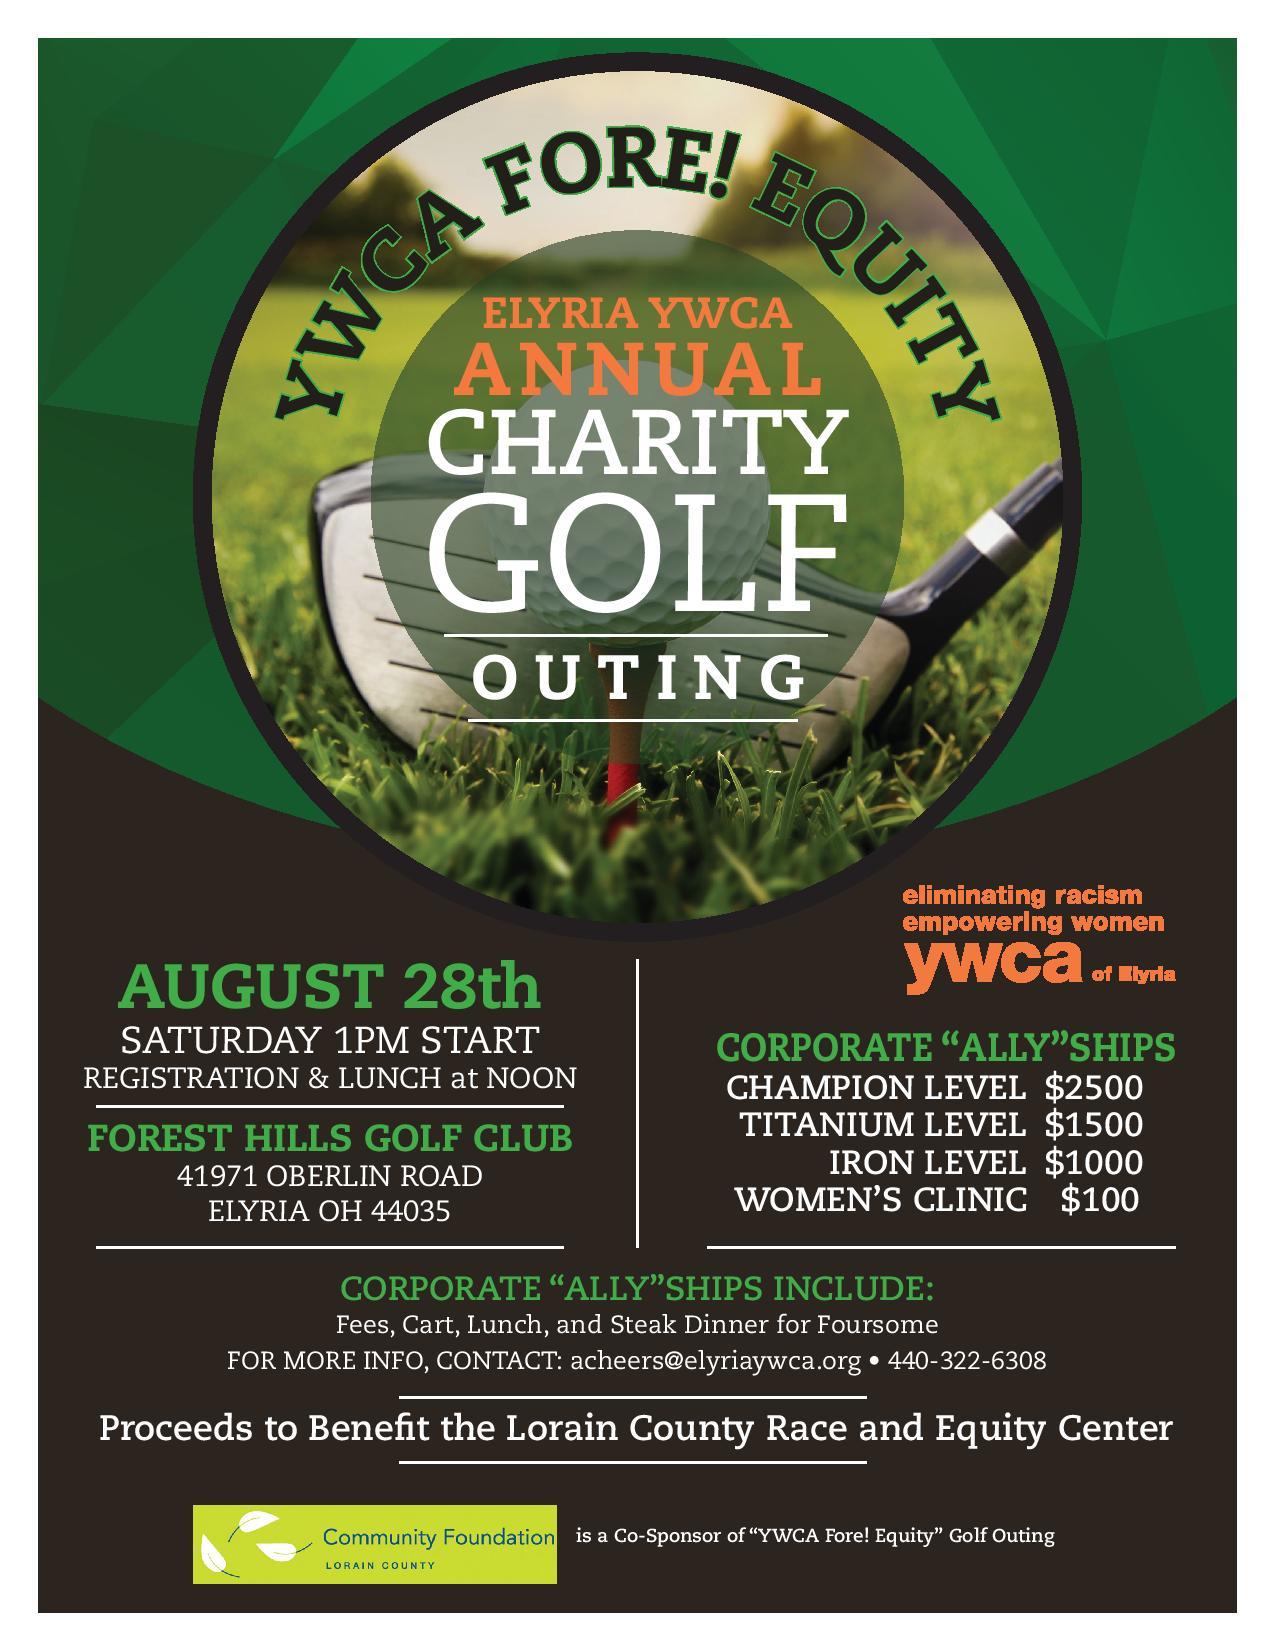 YWCA FORE! EQUITY ANNUAL CHARITY GOLF OUTING